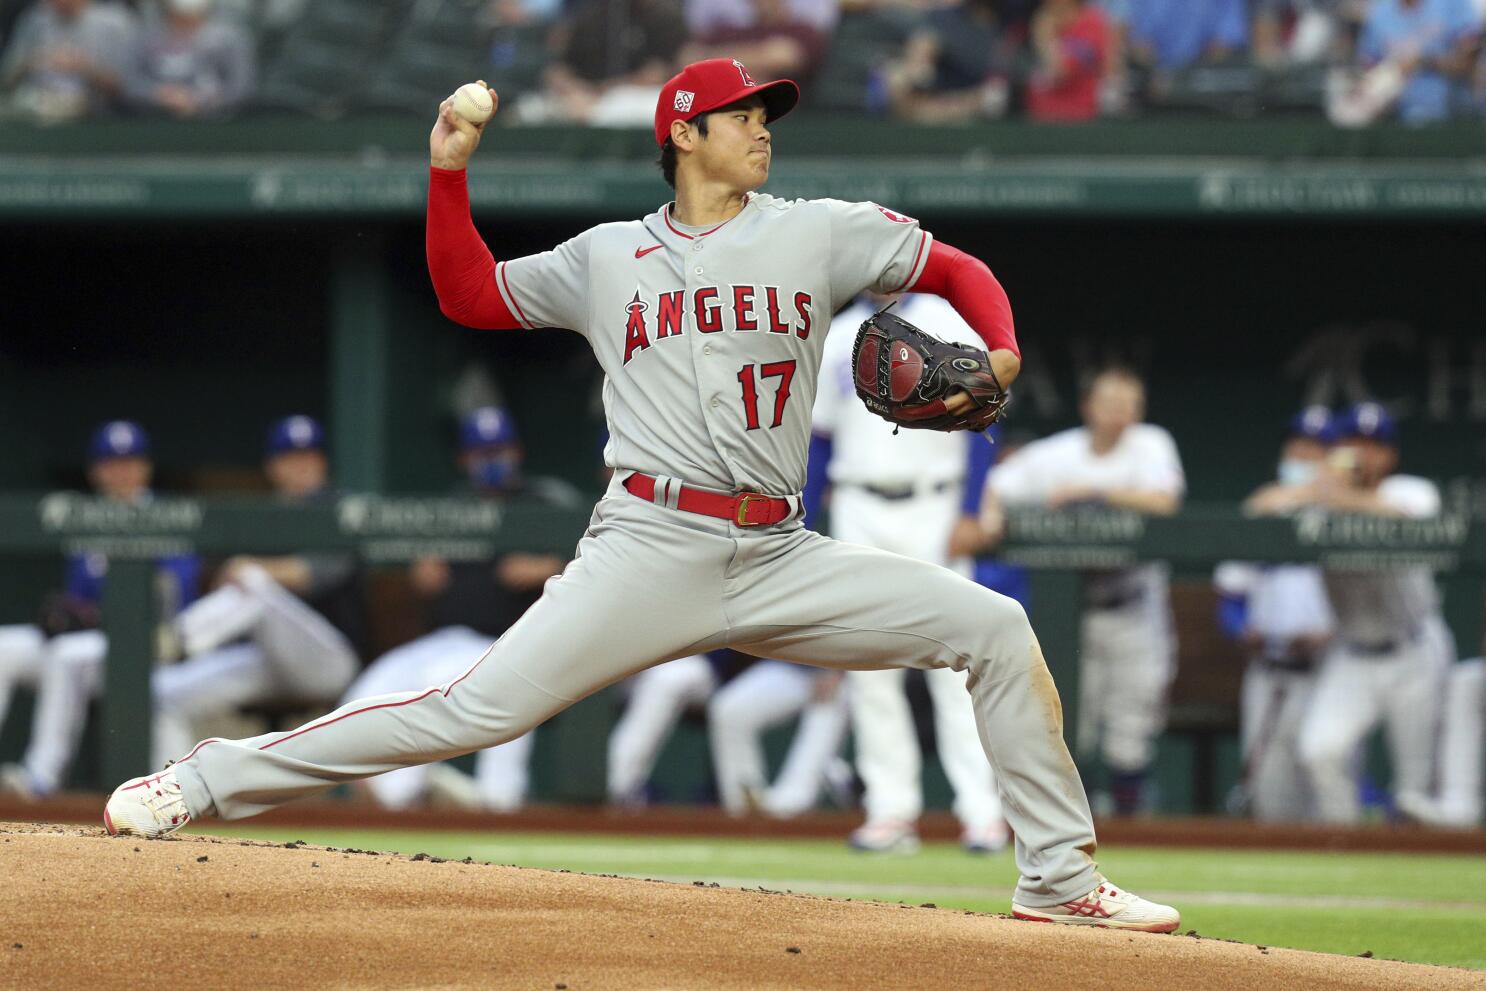 Shohei Ohtani goes from disaster to magnificent in Angels' win